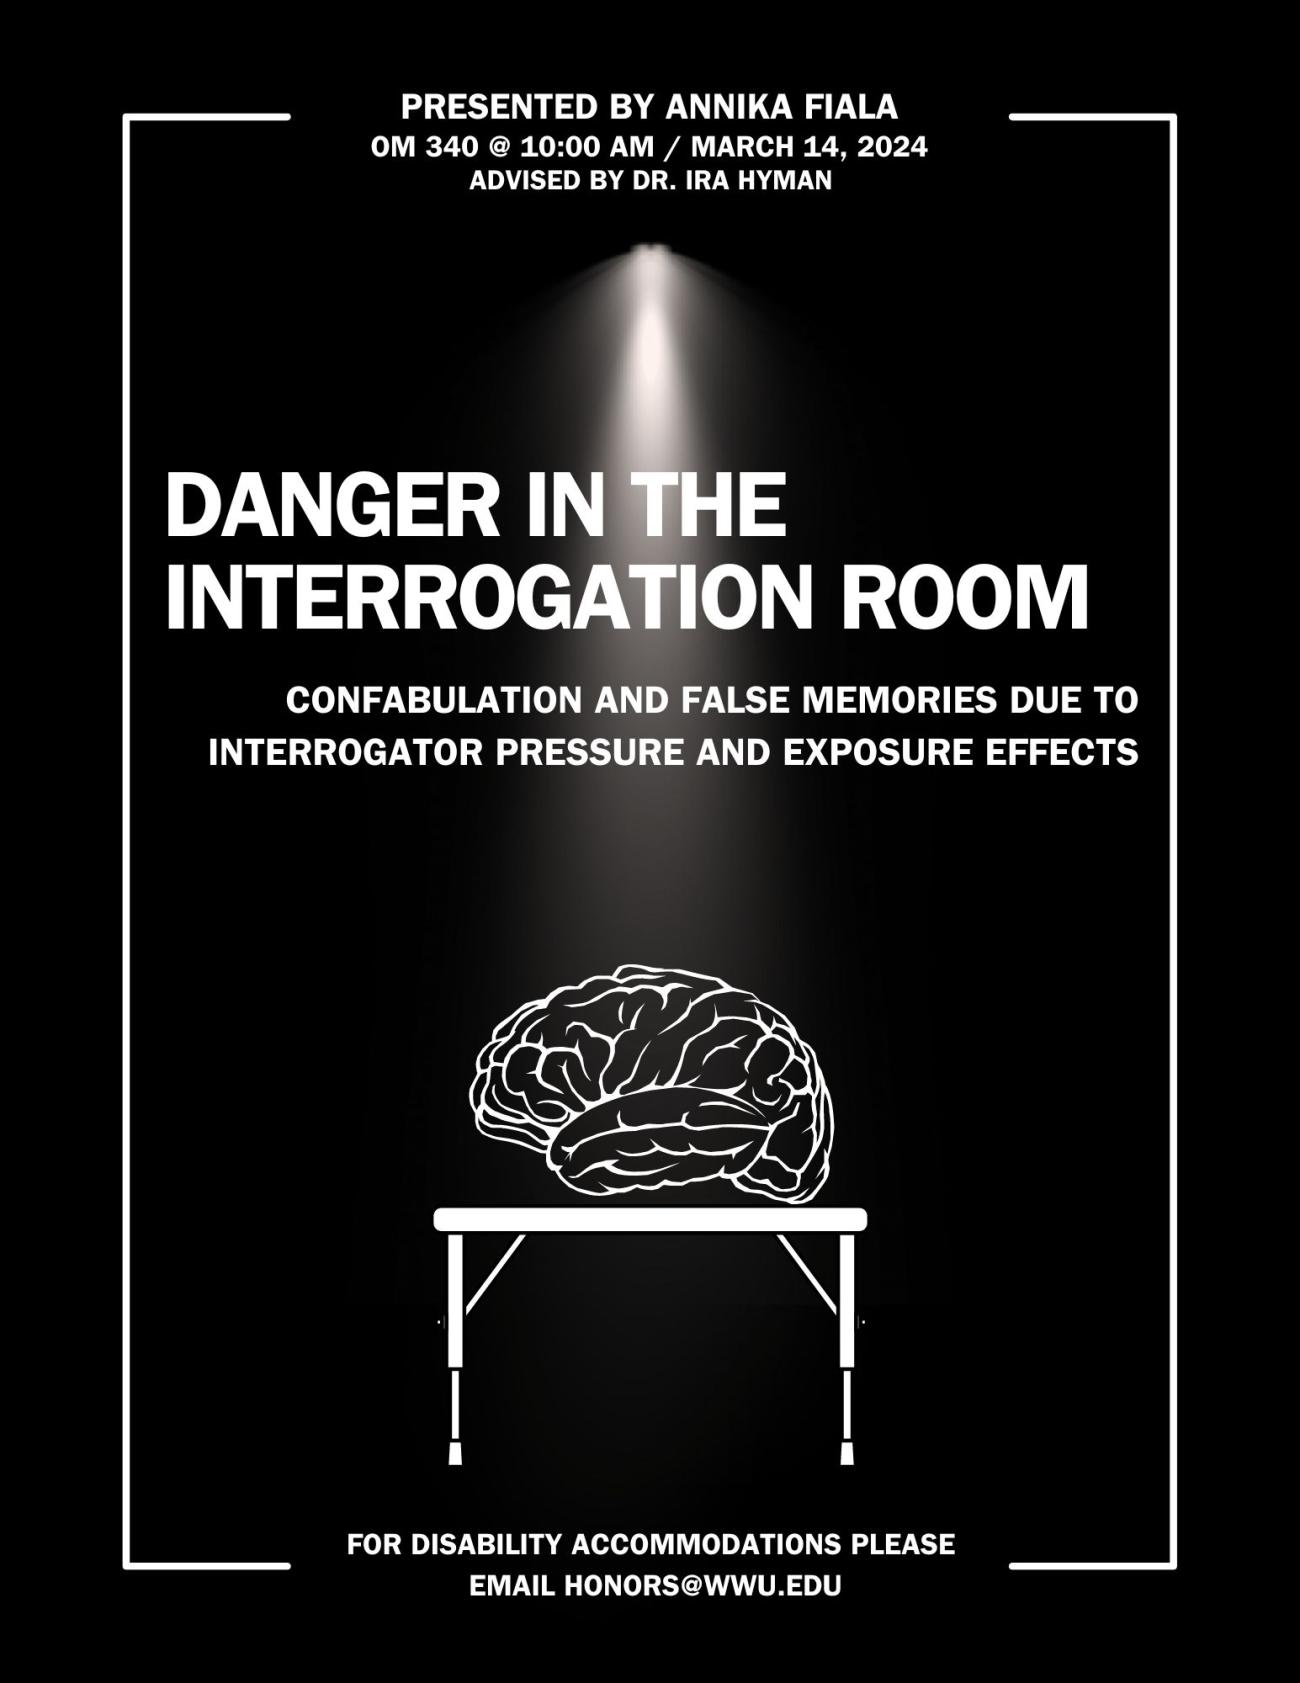 A black poster with a hanging light illuminating a white outline of the human brain on a white table. The text reads “Dangers in the Interrogation Room: Confabulation and False Memories due to Interrogator Pressure and Exposure Effects. Presented by Annika Fiala. Advised by Dr. Ira Hyman. March 14th, 2024. OM 340 at 10:00 AM. For disability accommodations please email honors@wwu.edu.